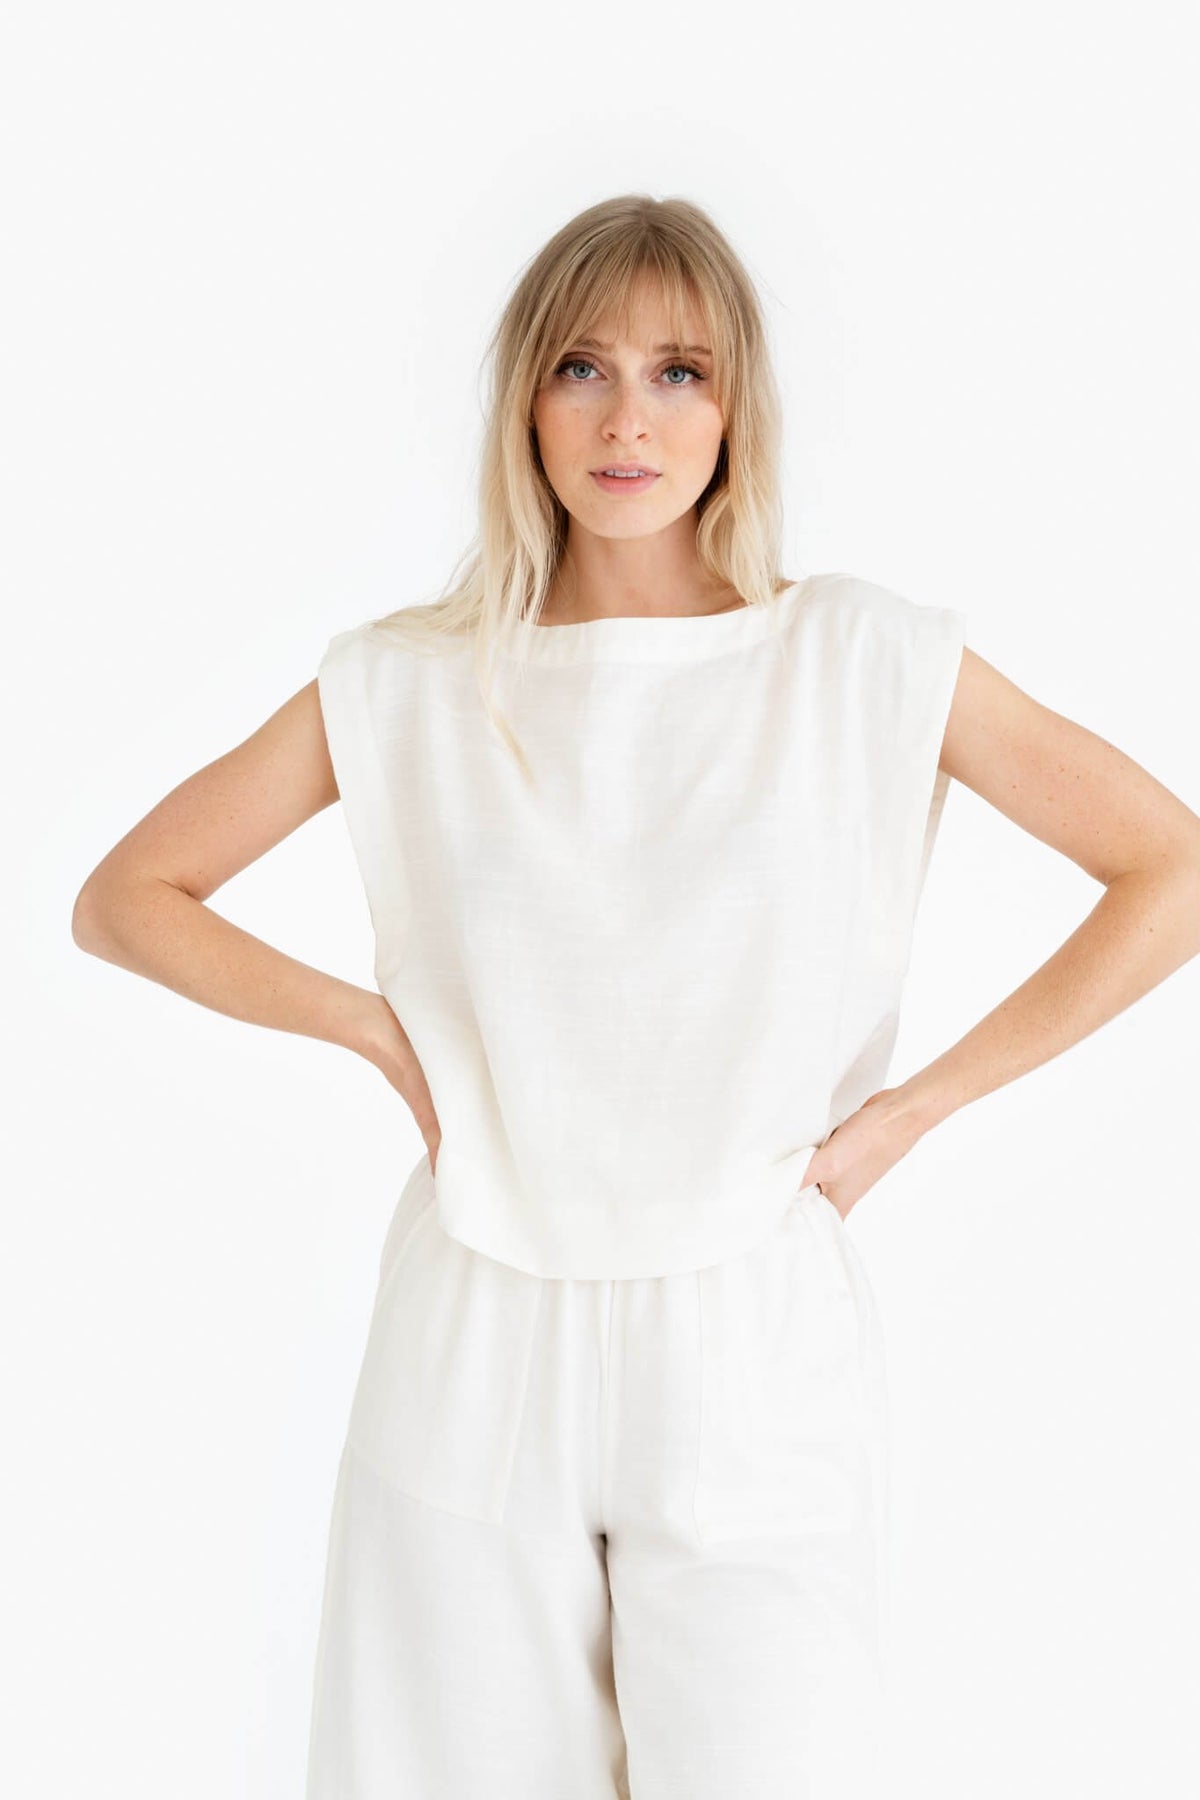 LAUDE The Label Everyday Top in Ivory